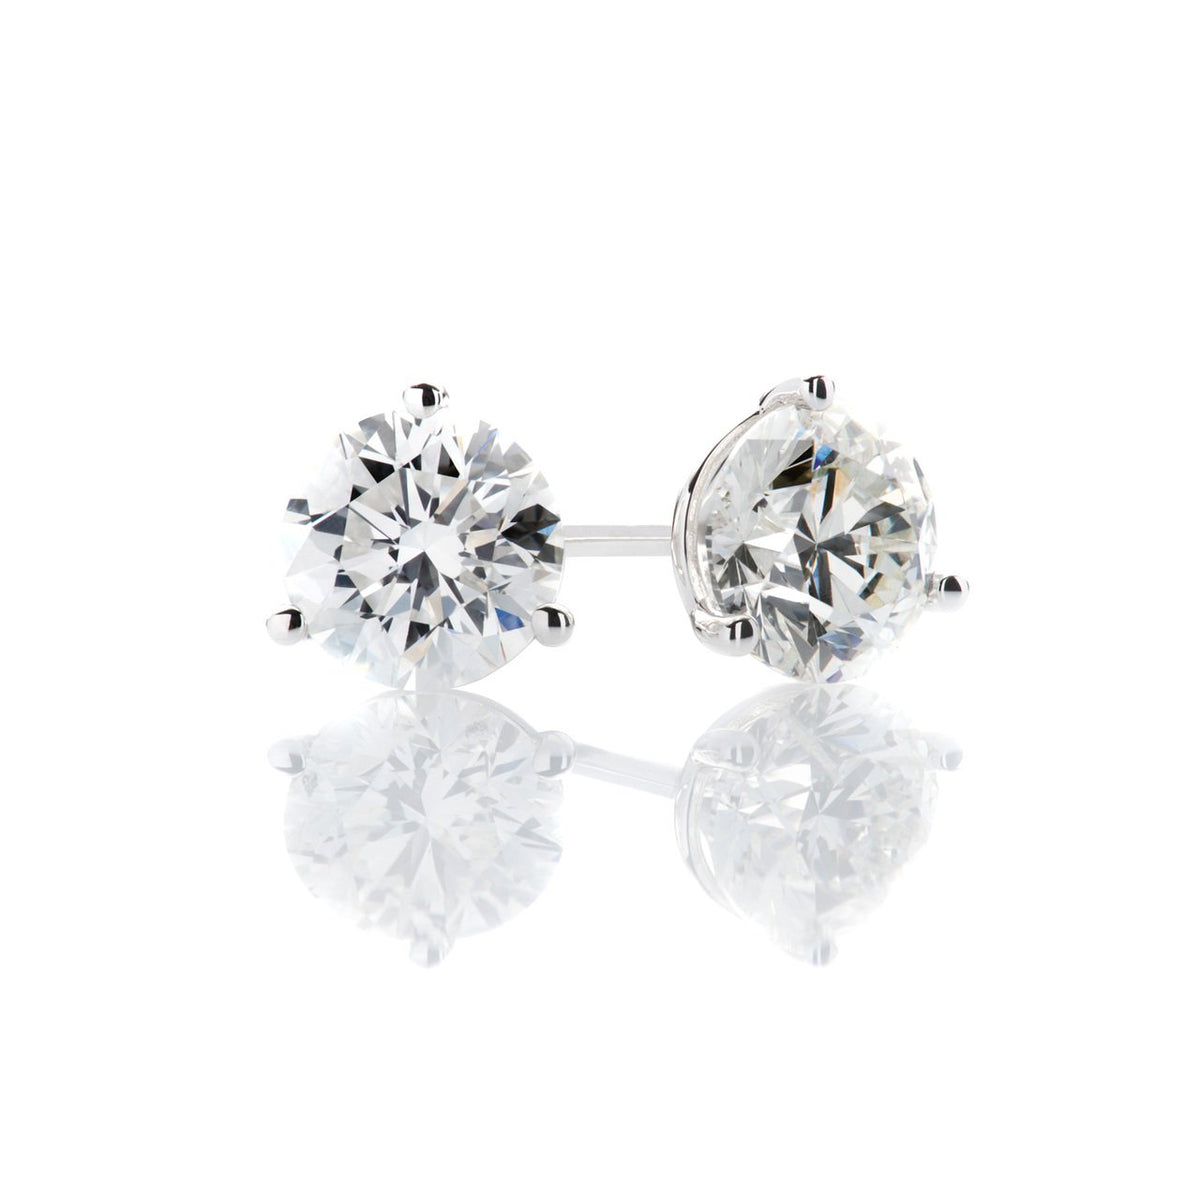 Sabel Collection Round Cut Diamond Studs in 1.00-1.09cttw Weight